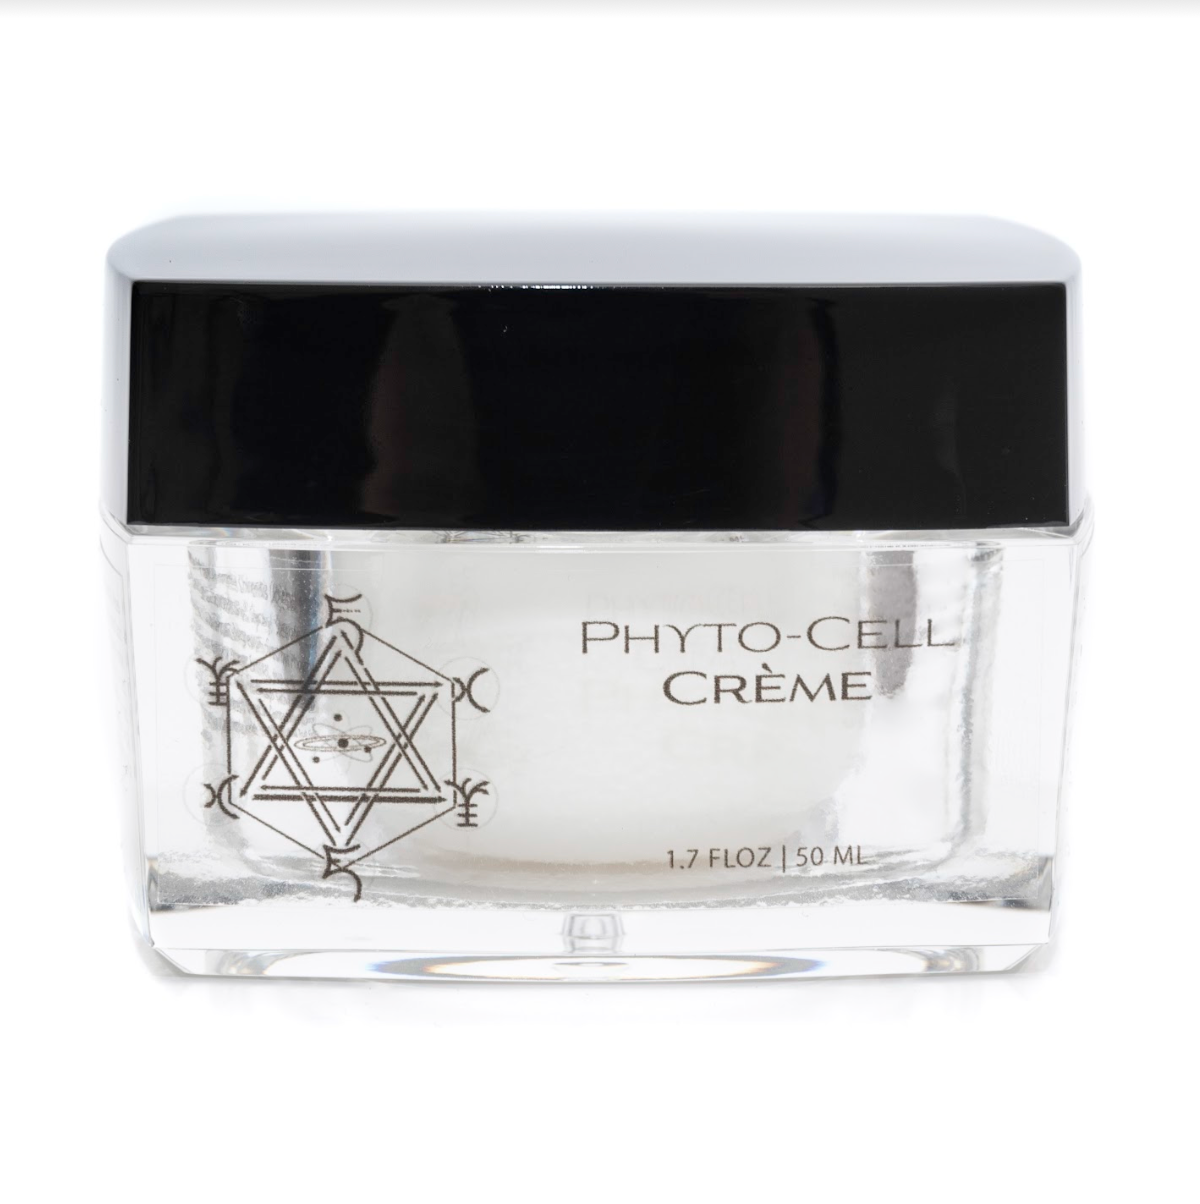 Phyto-Cell Crème